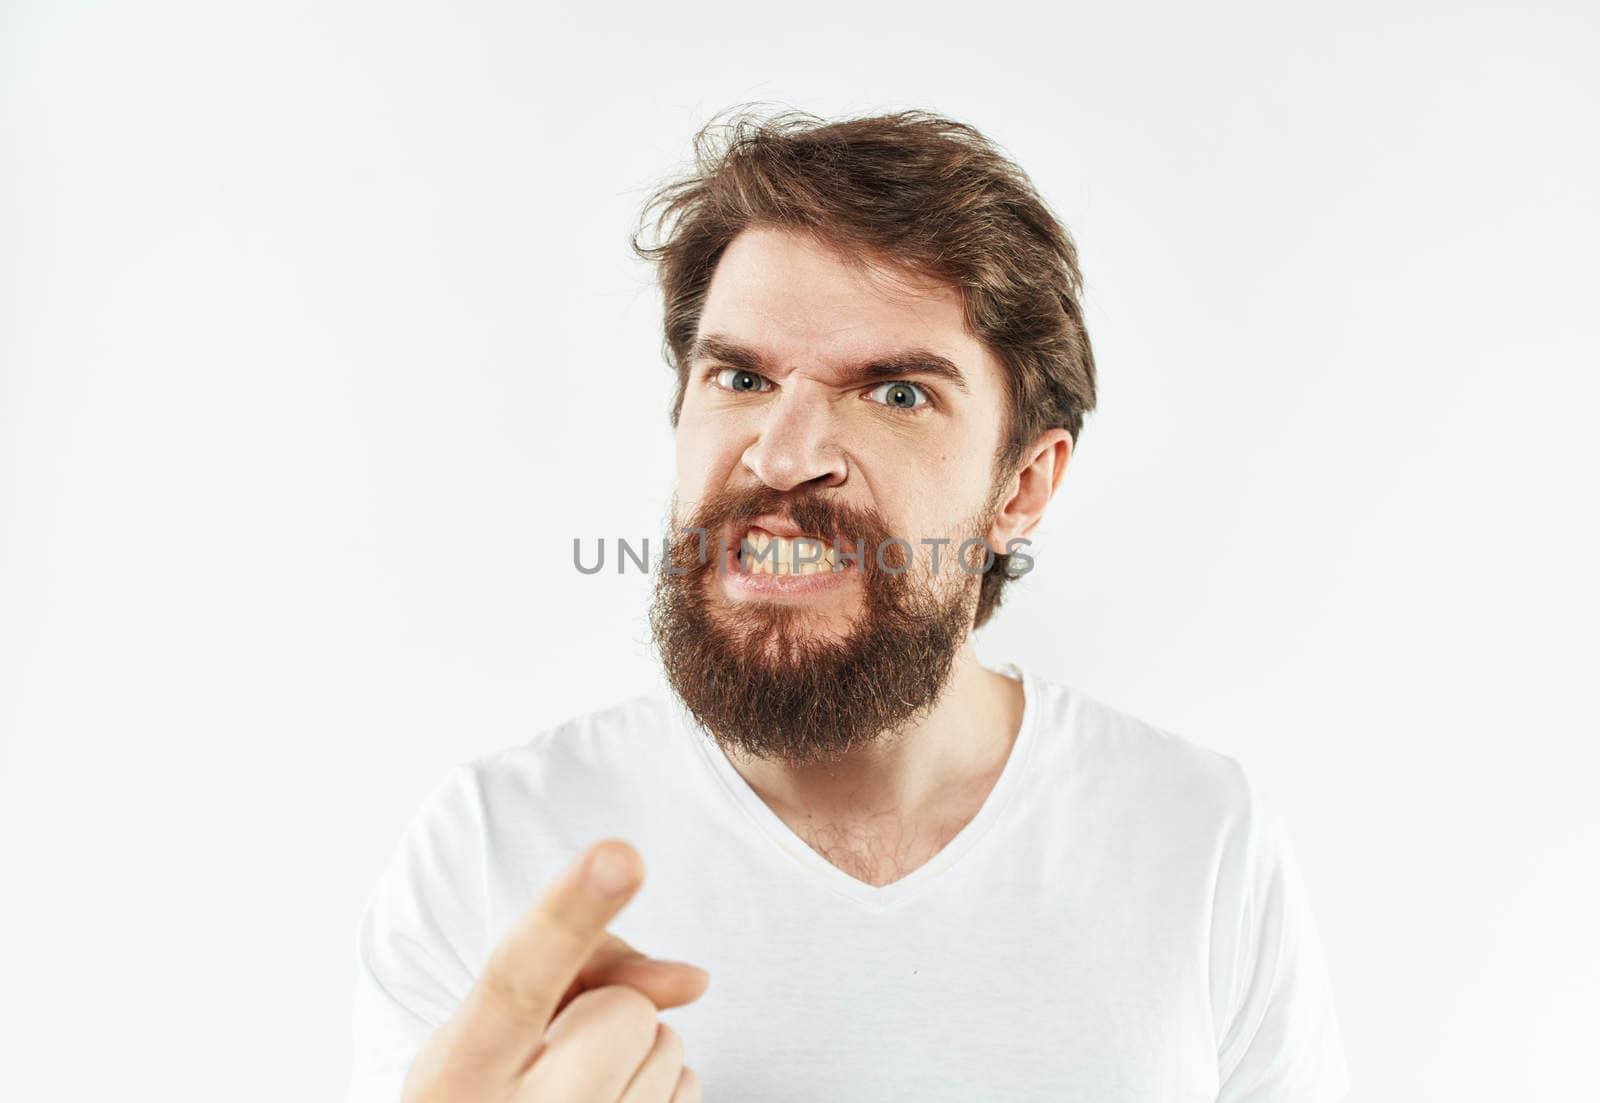 A bearded man in a white T-shirt gestures with his hands on a light background by SHOTPRIME